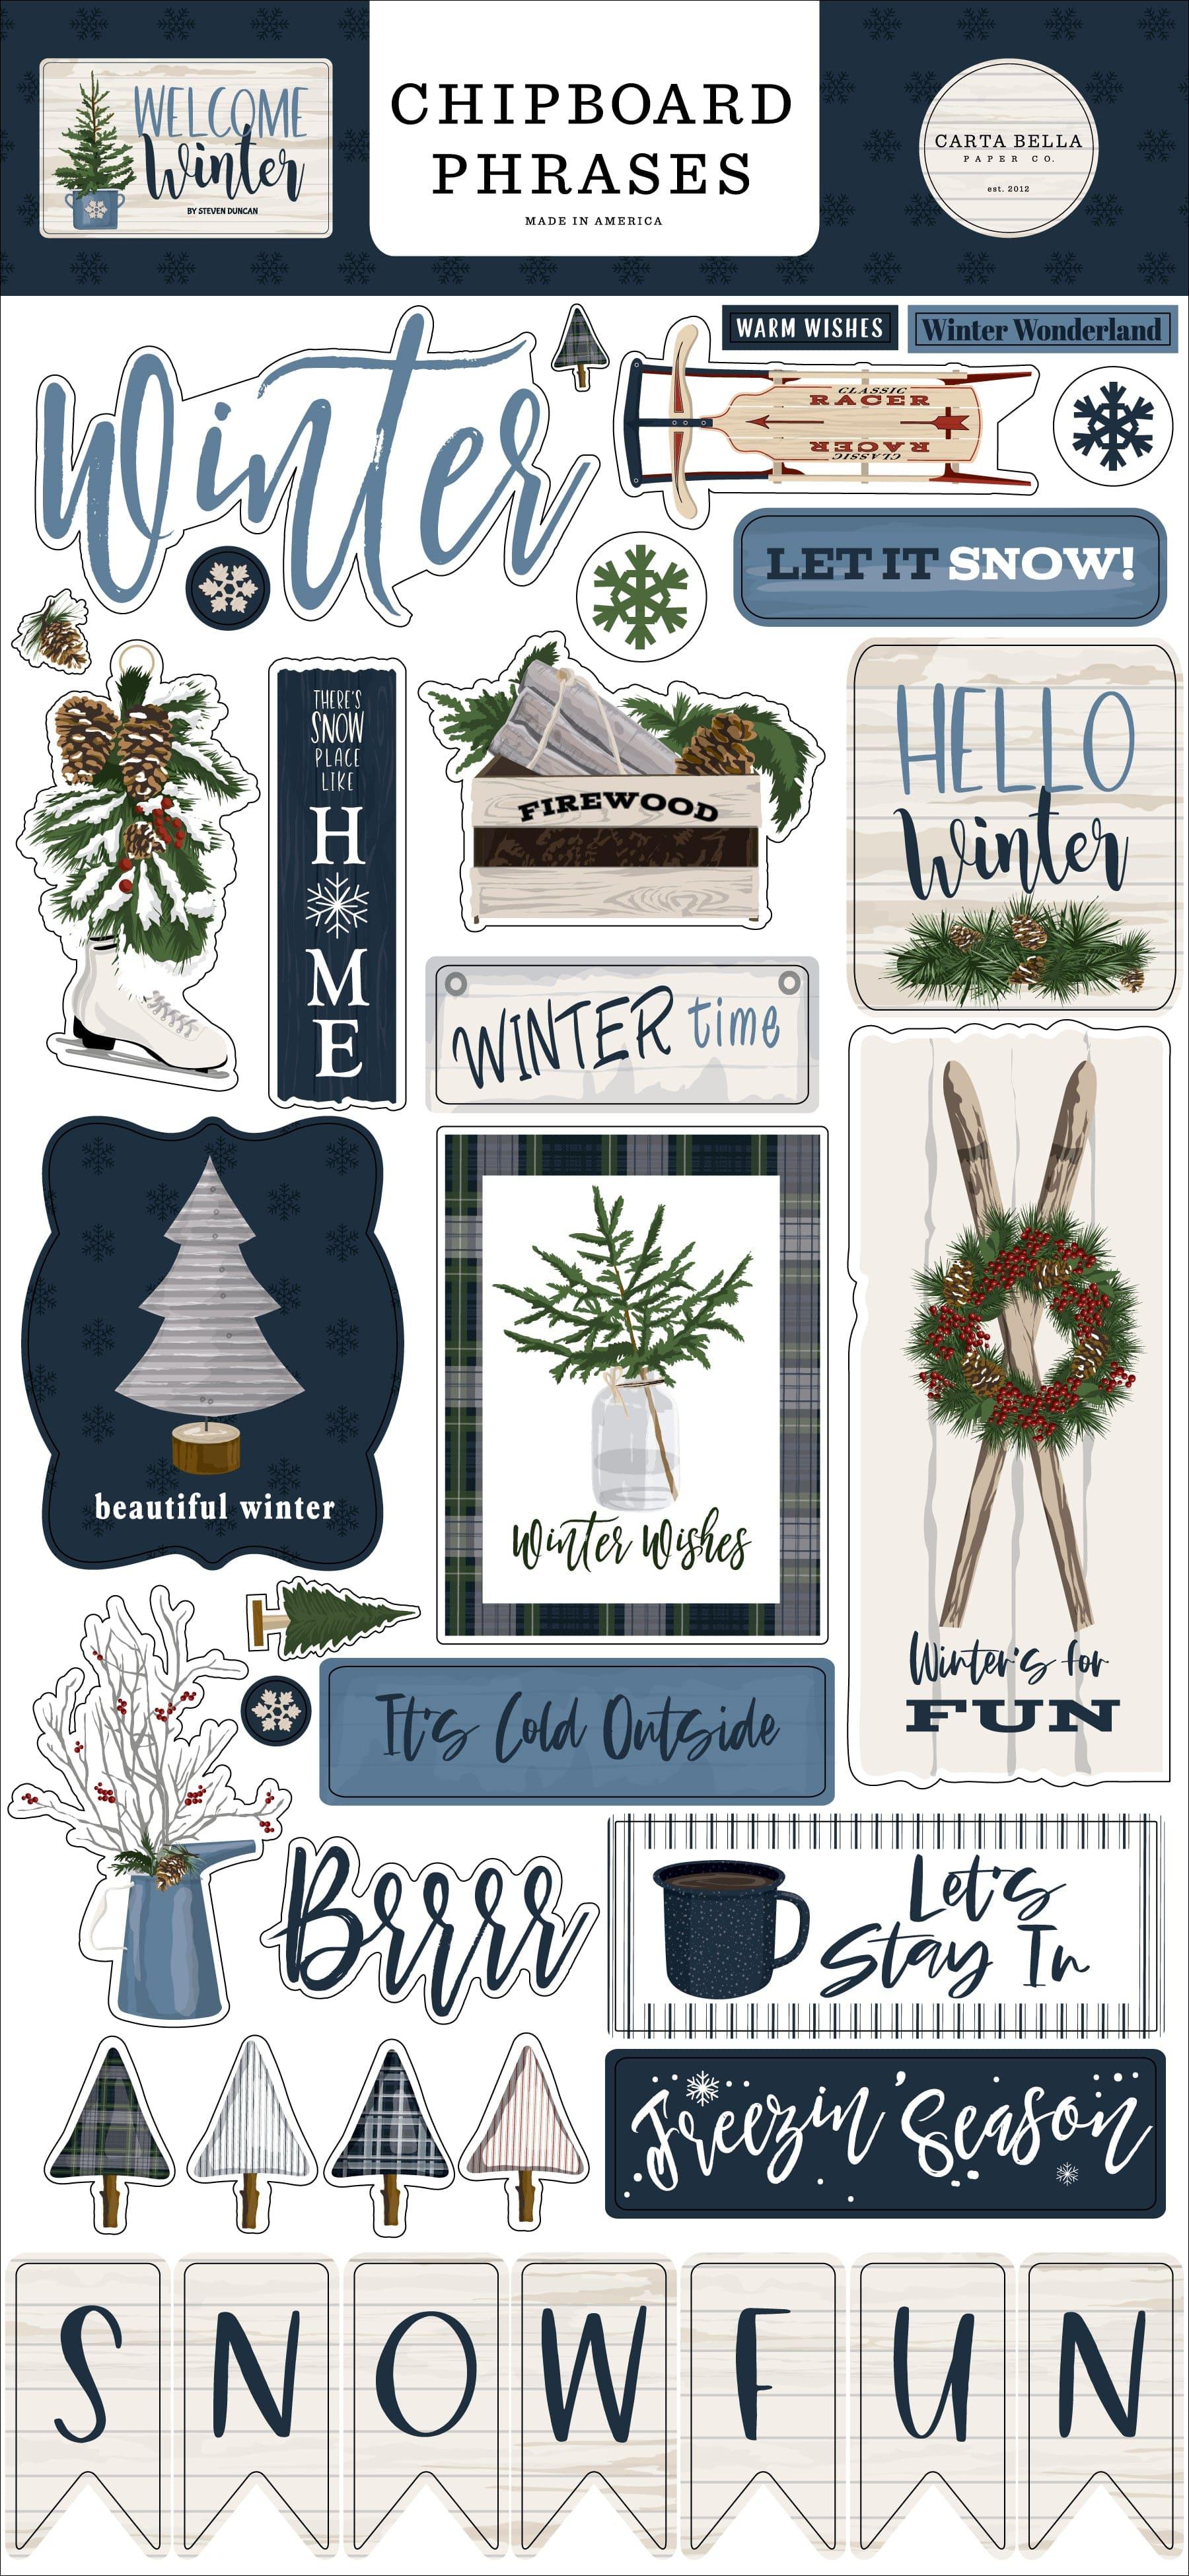 Welcome Winter Collection 6 x 12 Scrapbook Chipboard Phrases by Carta Bella - Scrapbook Supply Companies